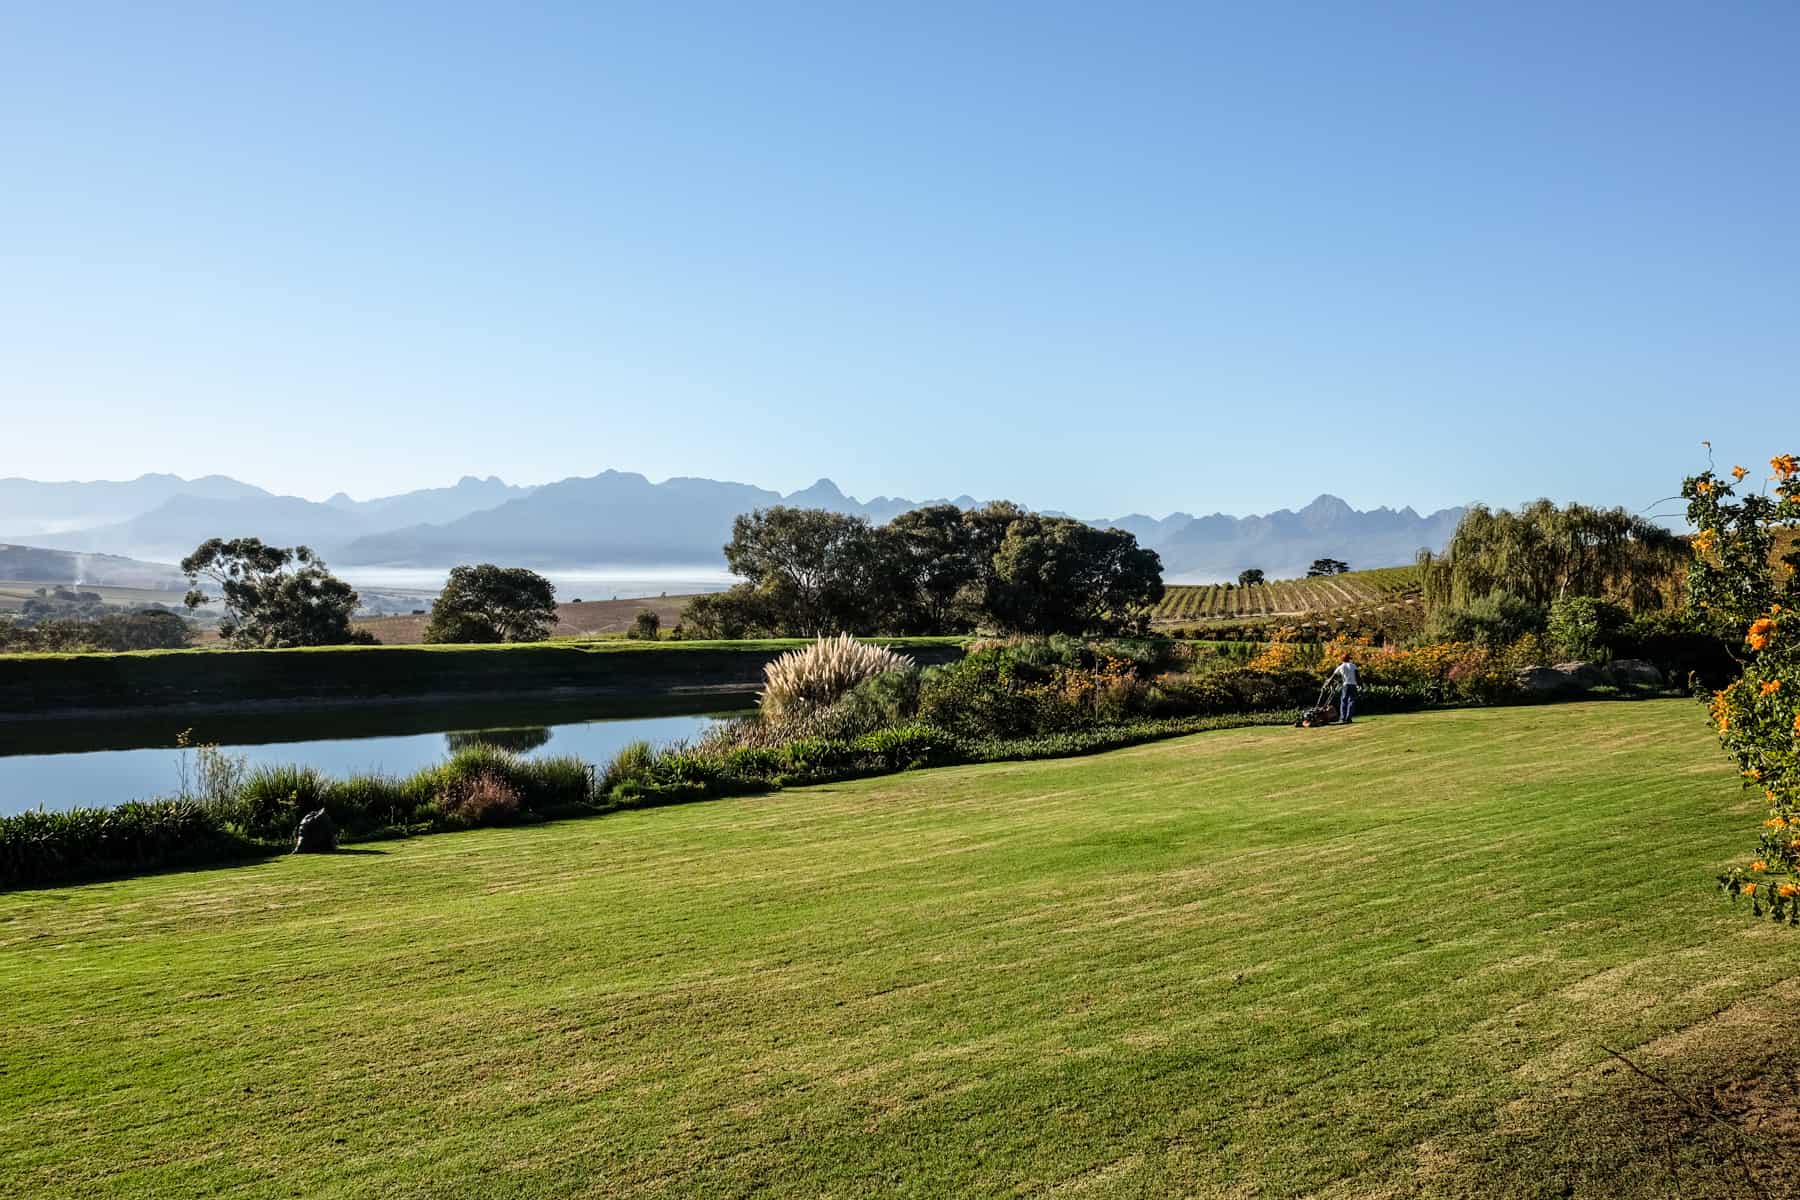 A man tends to the green lawn on the grounds of Jordan Wine Estate in Stellenbosch, which streches far into the distance behind the hedgerows, backed by mountains